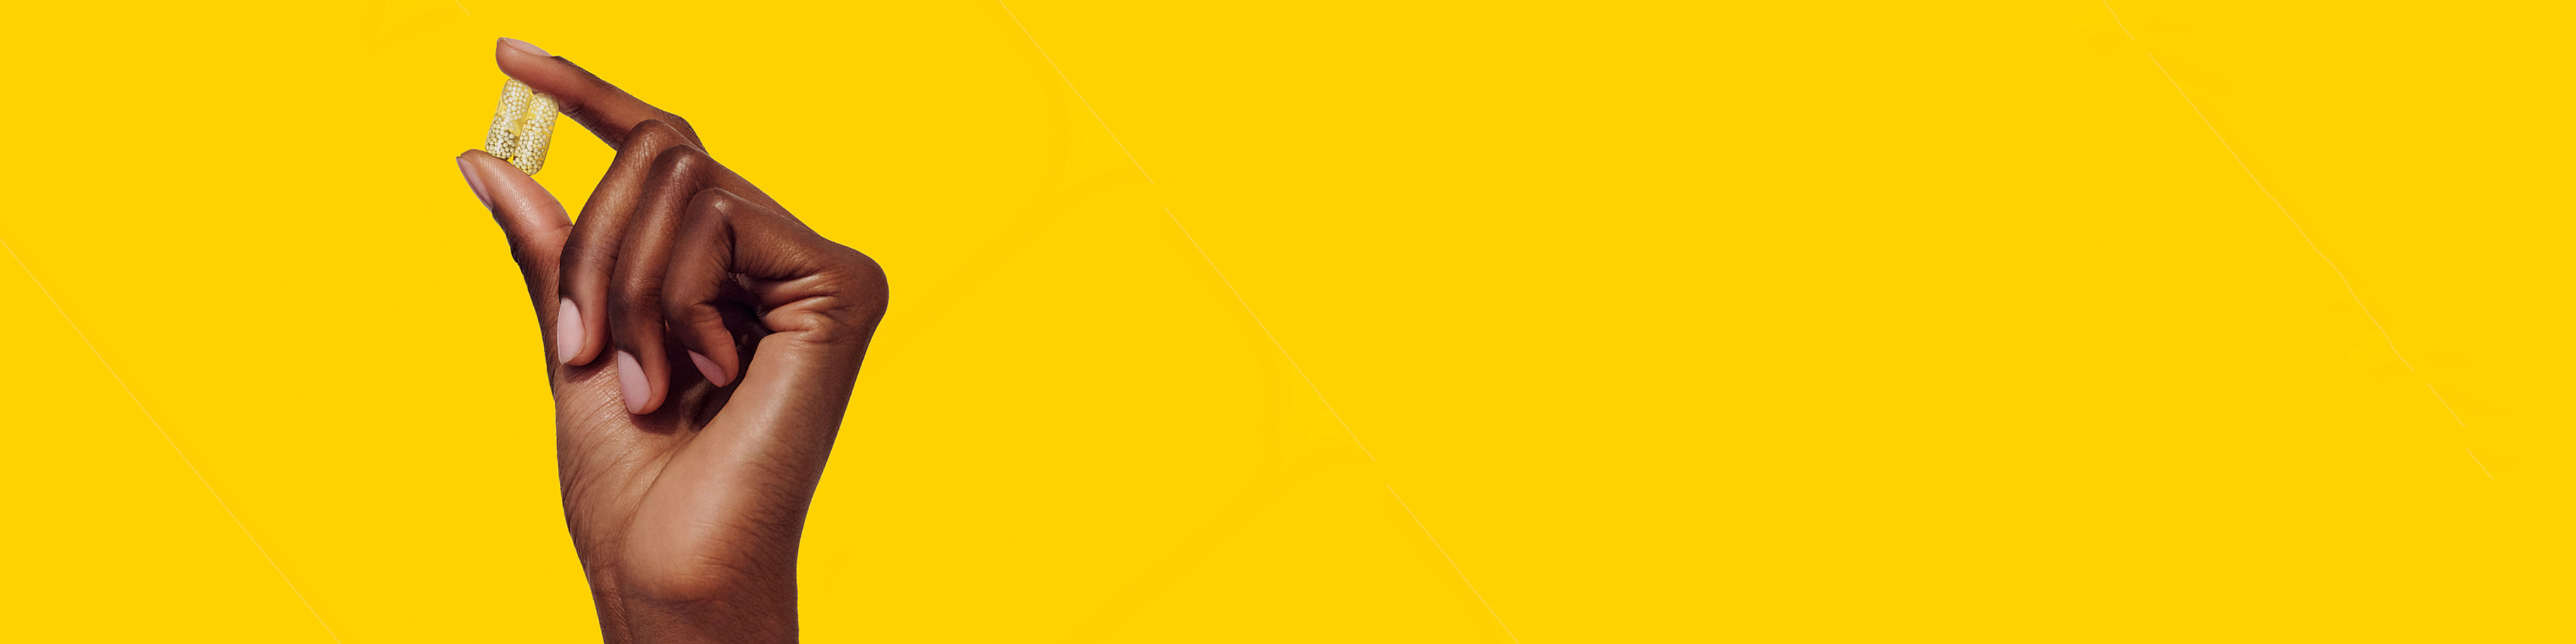 Two vitamin capsules being held between two fingers on a yellow background.